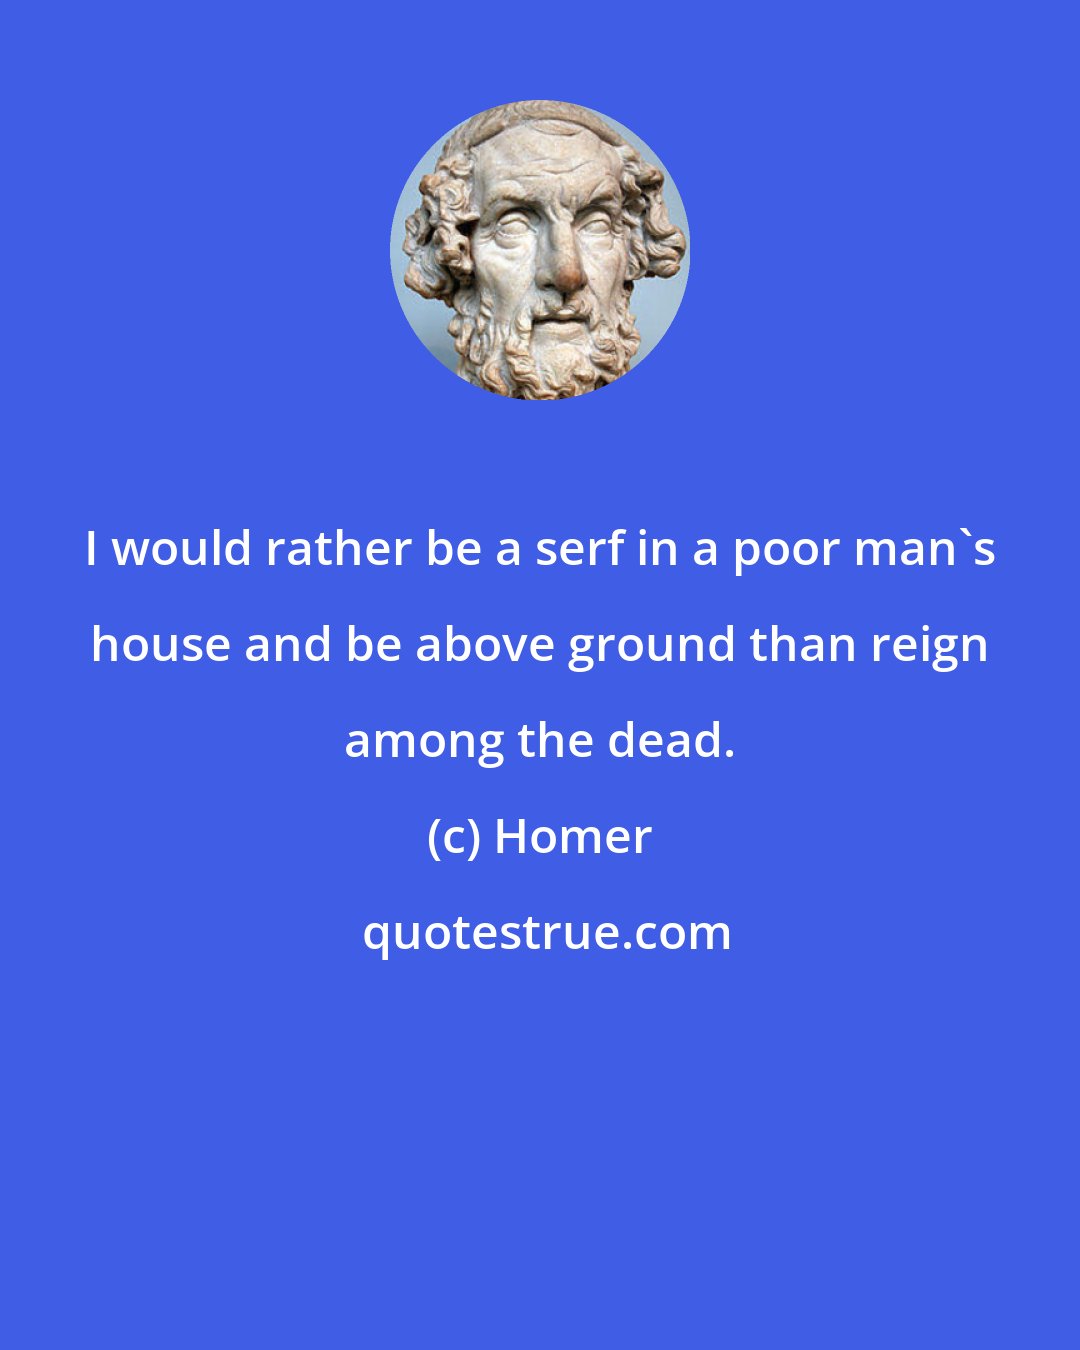 Homer: I would rather be a serf in a poor man's house and be above ground than reign among the dead.